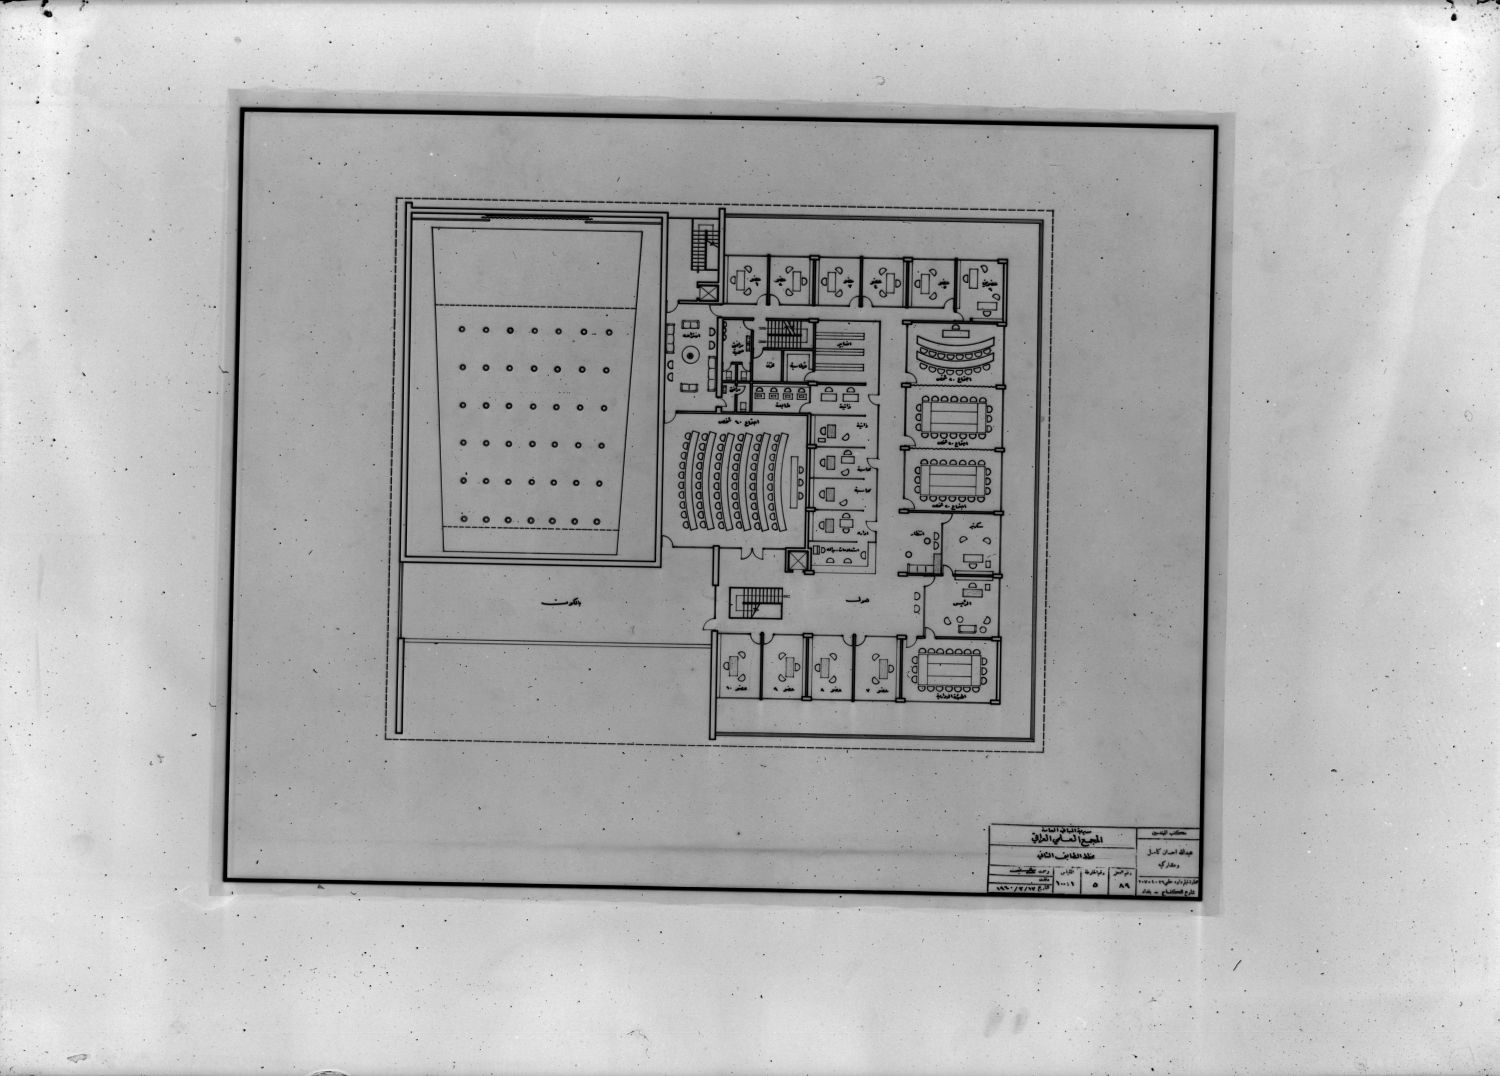 Second floor plan (early version not adopted in final construction).